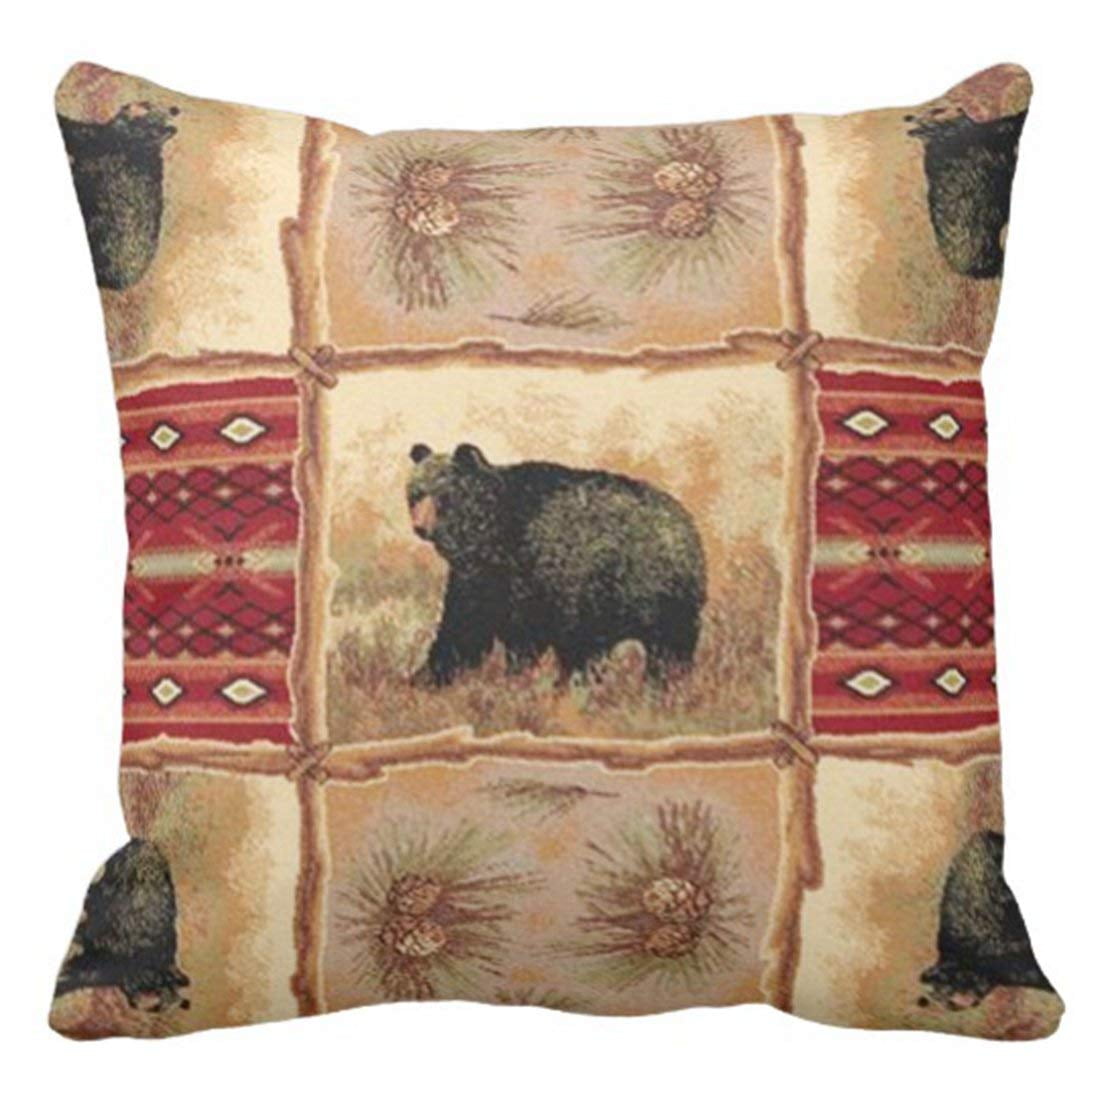 20x20 Sierra Bear Lodge Rustic Cabin Throw Pillow Cover only